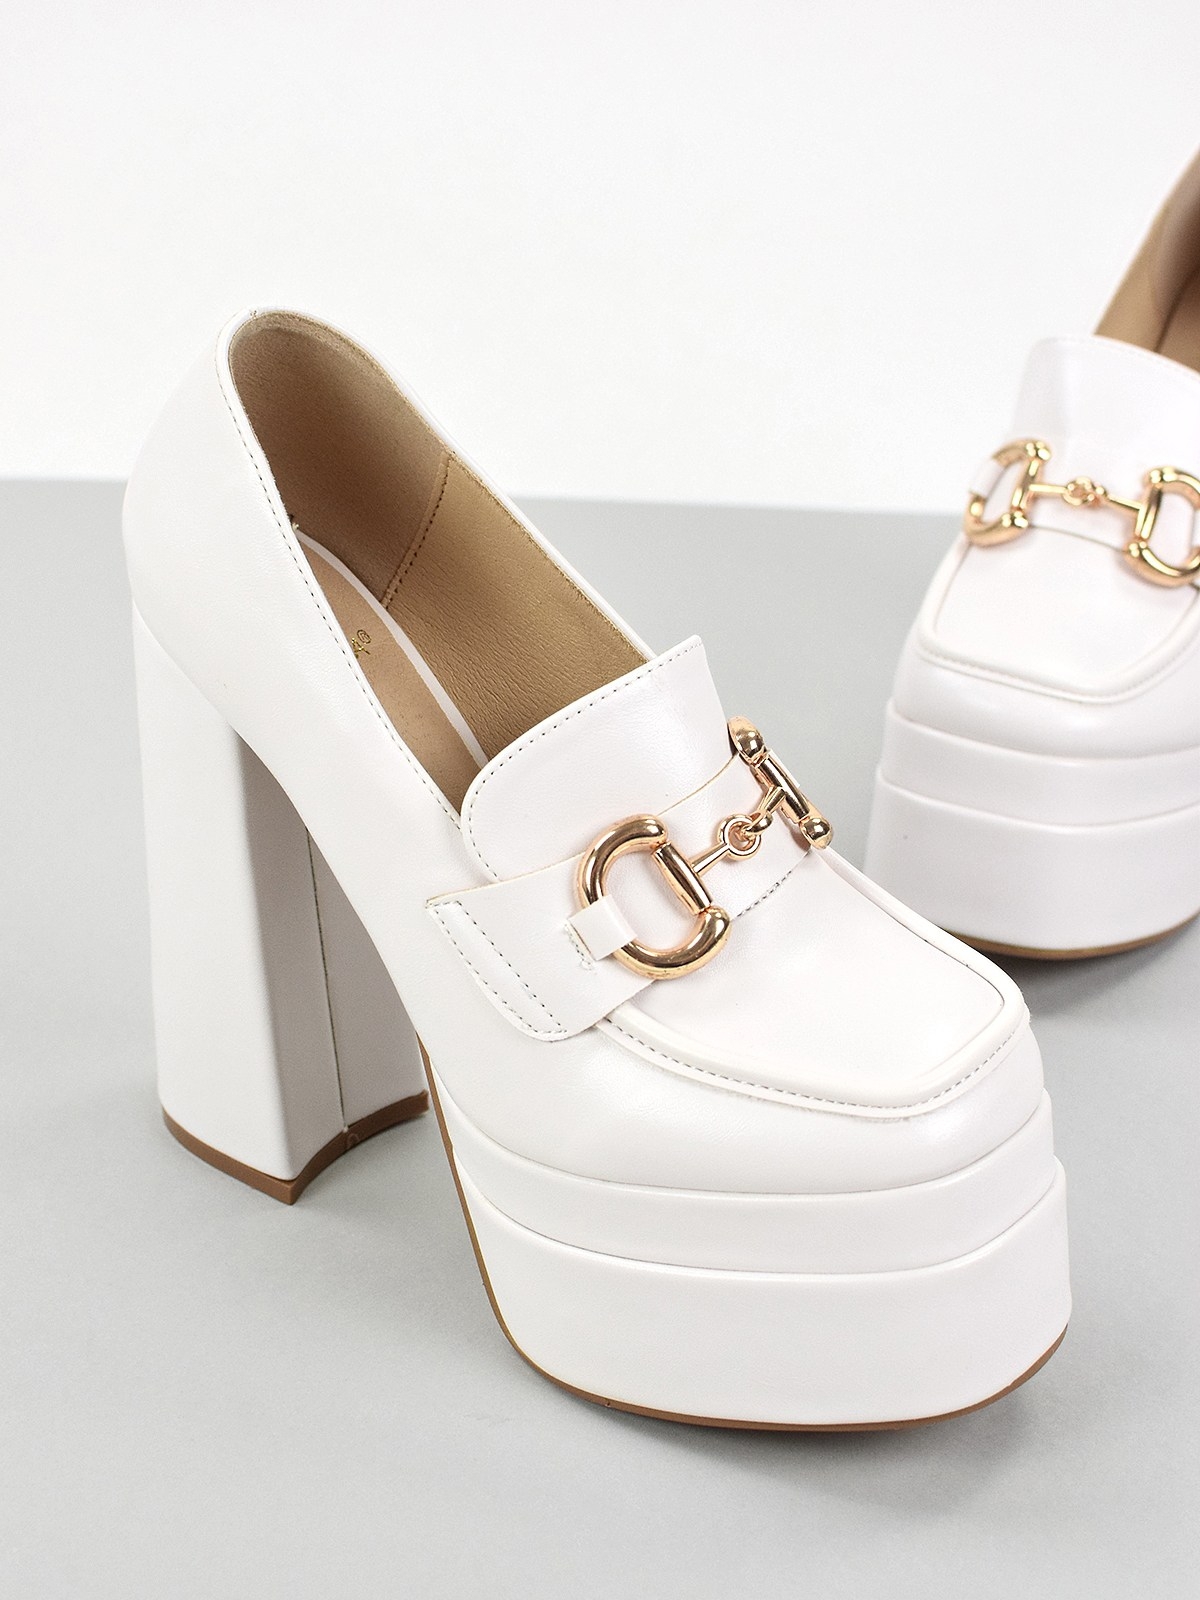 High heeled platform shoes with gold-tone metal trim in white